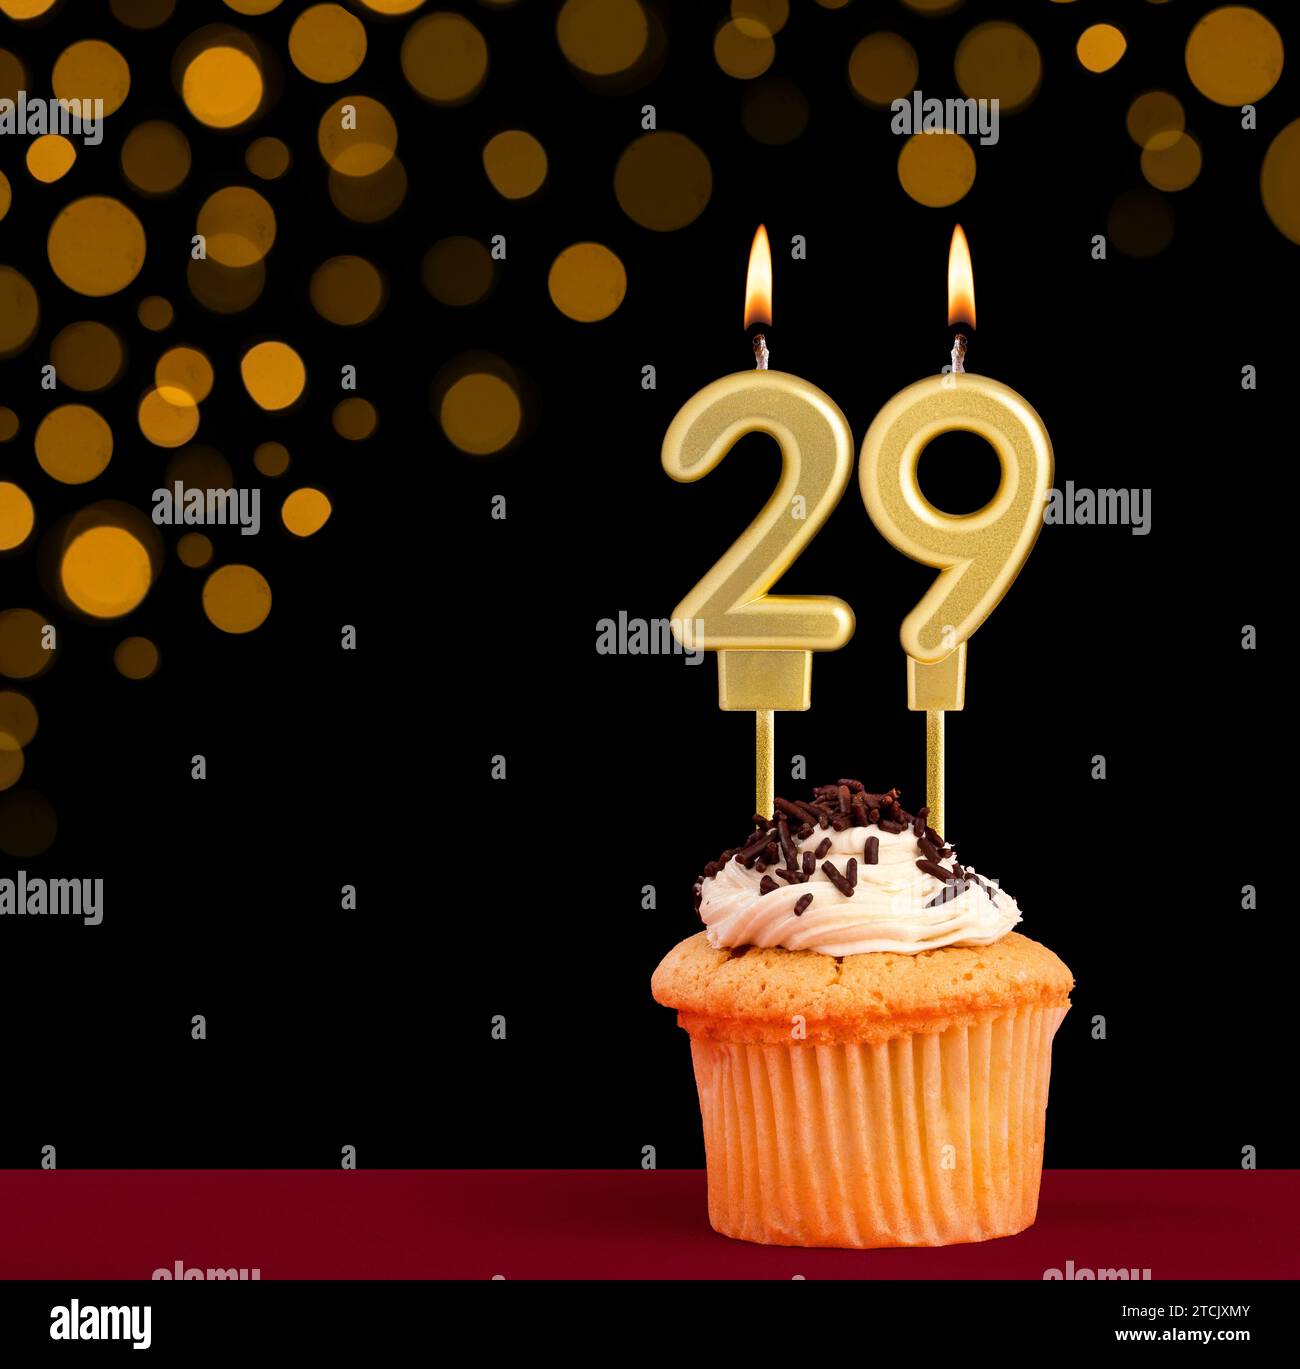 Number 29 birthday candle - Cupcake on black background with out of focus lights Stock Photo